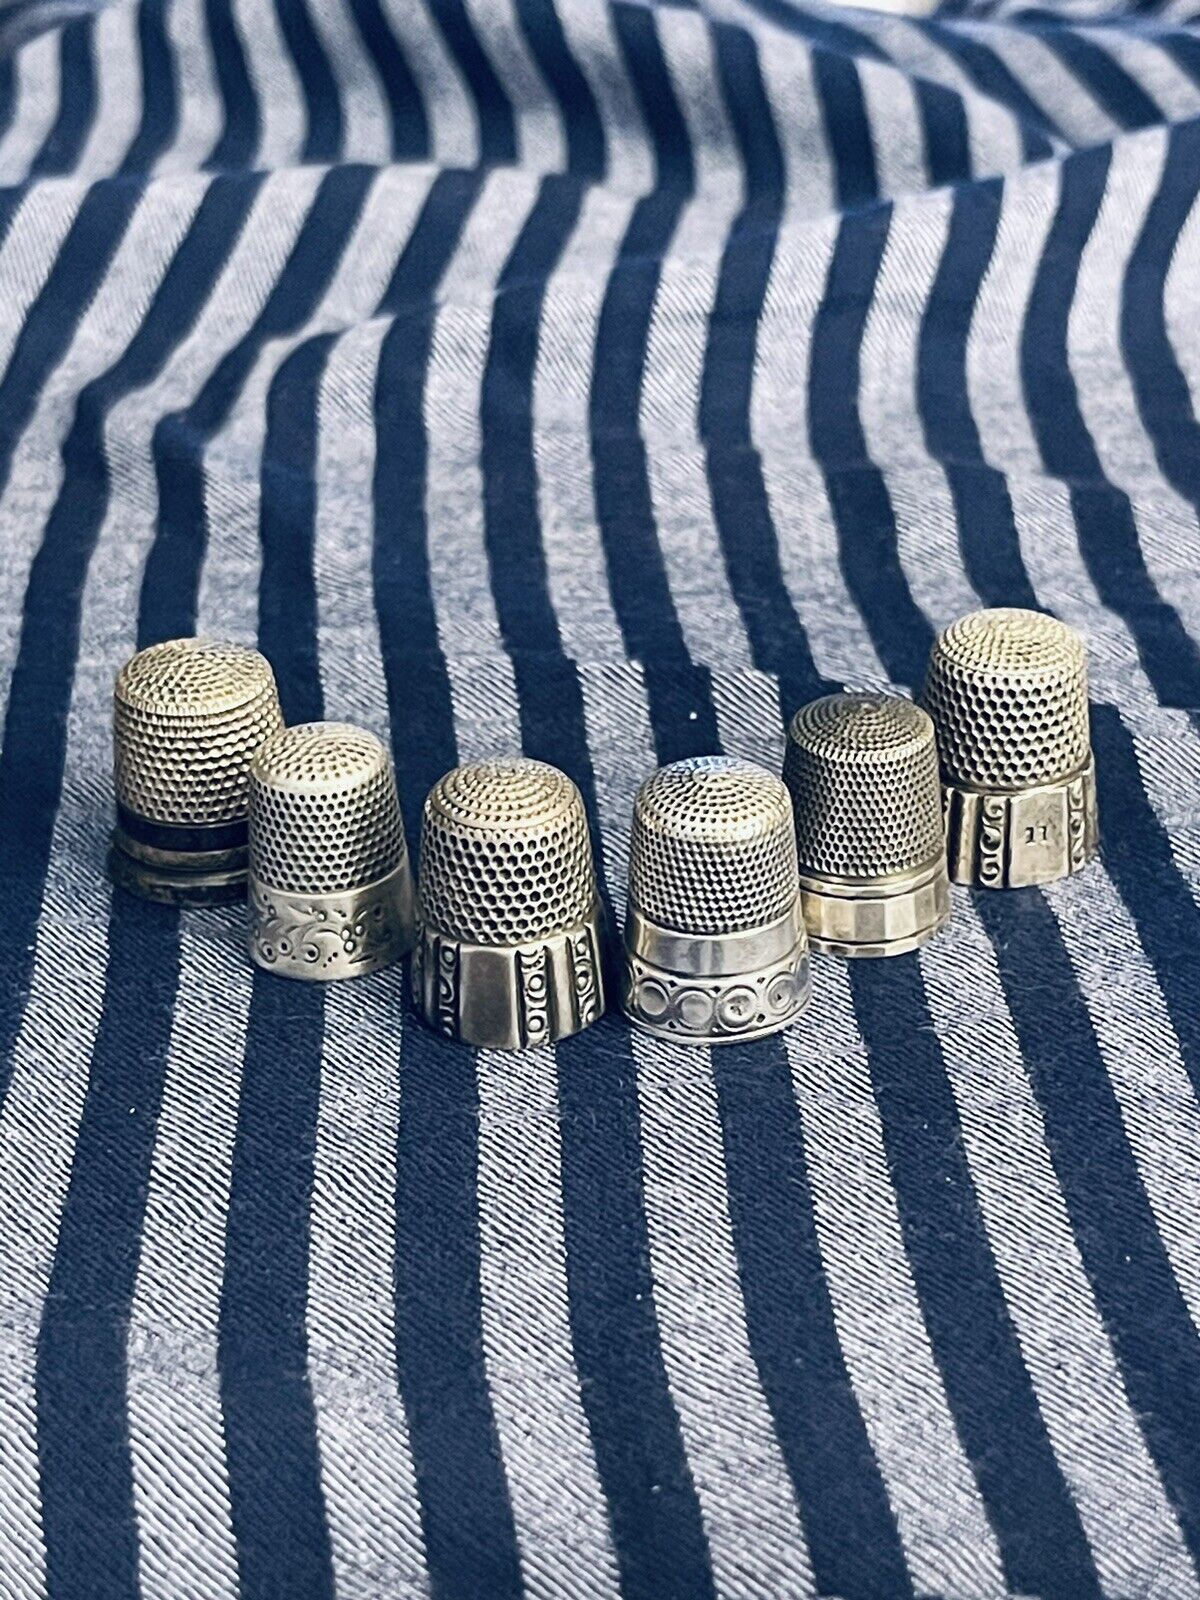 Antique Sterling Silver Sewing Thimbles 6 Piece Lot Very Good Condition 